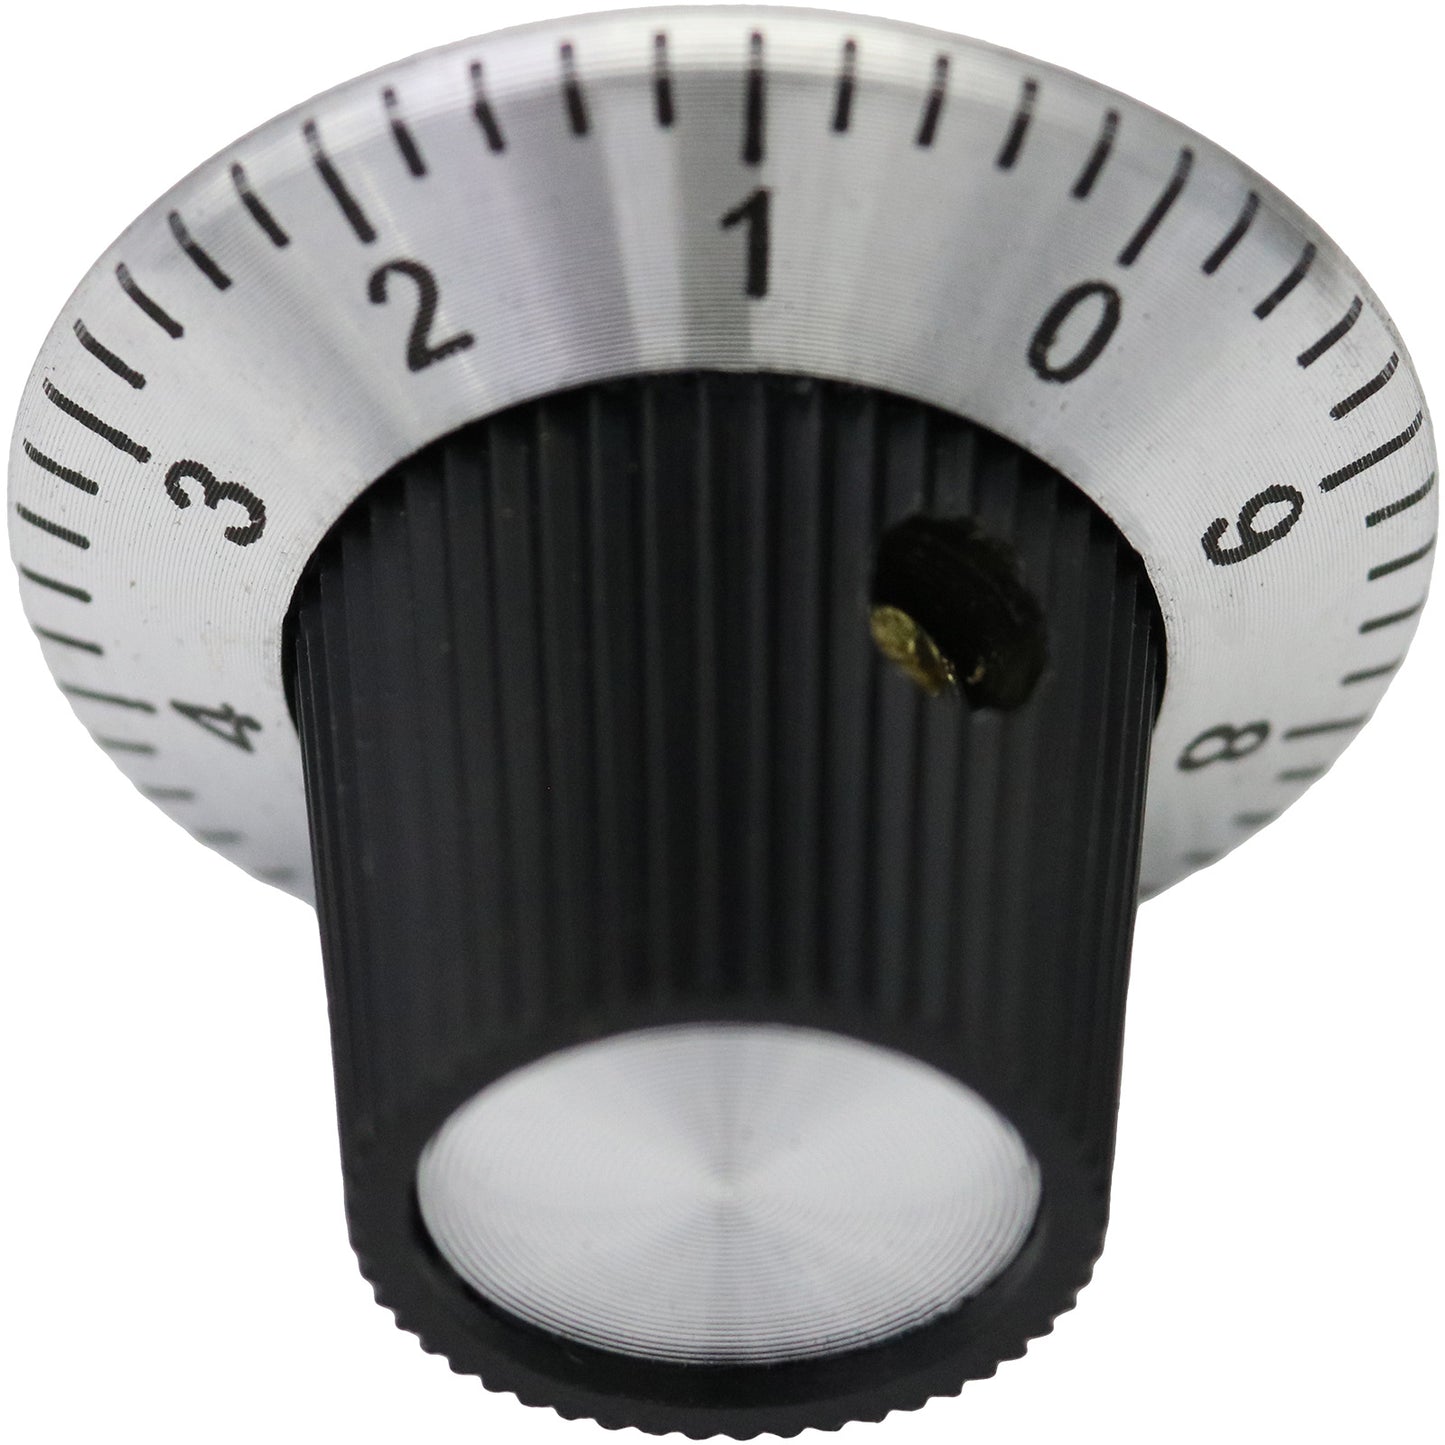 Metal Skirted Number Scale Dial Control Knob With Metal End Cap